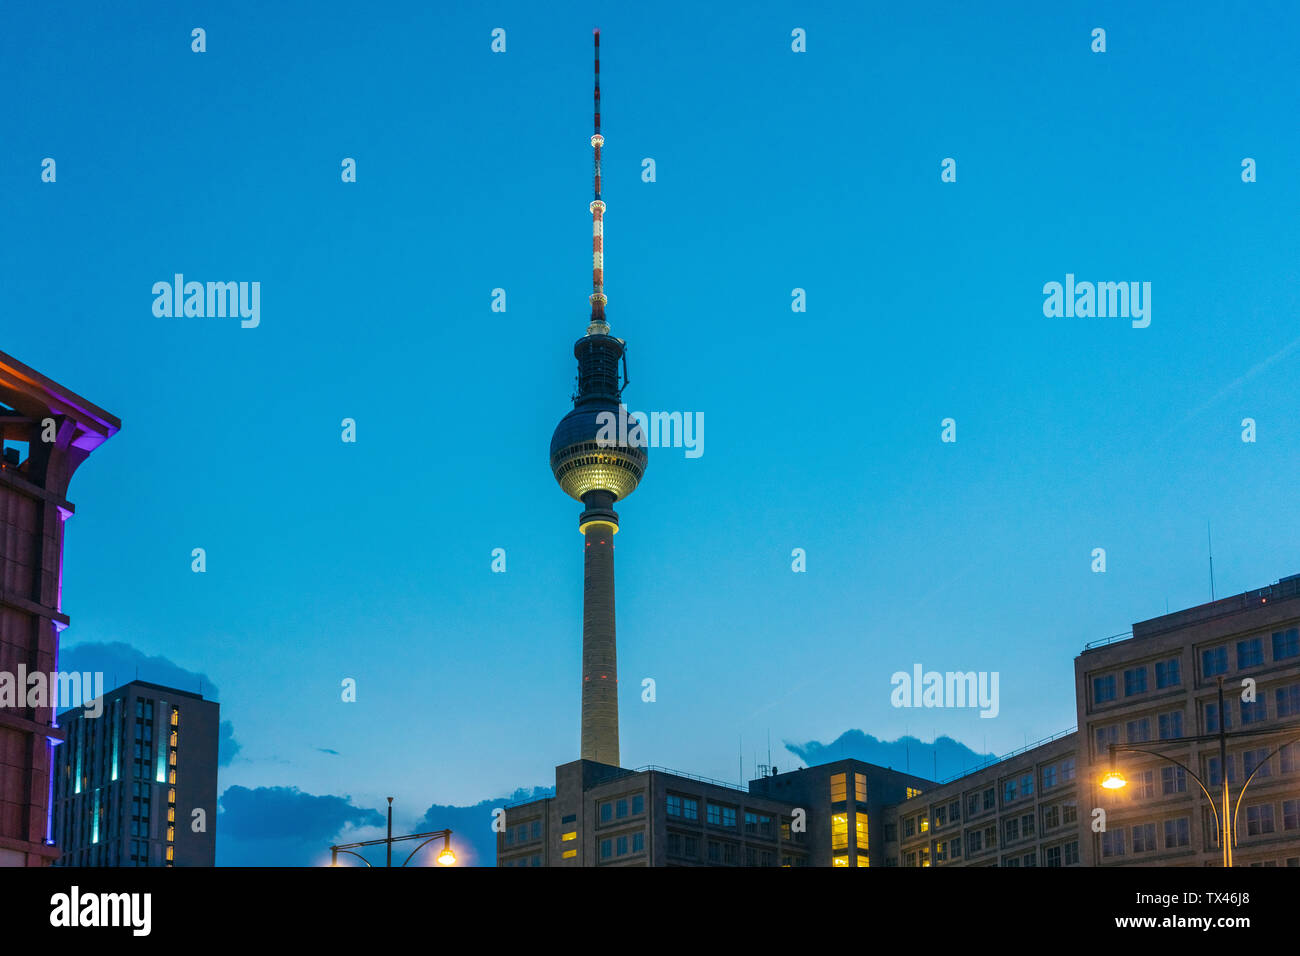 Germany, Berlin, television tower at night Stock Photo